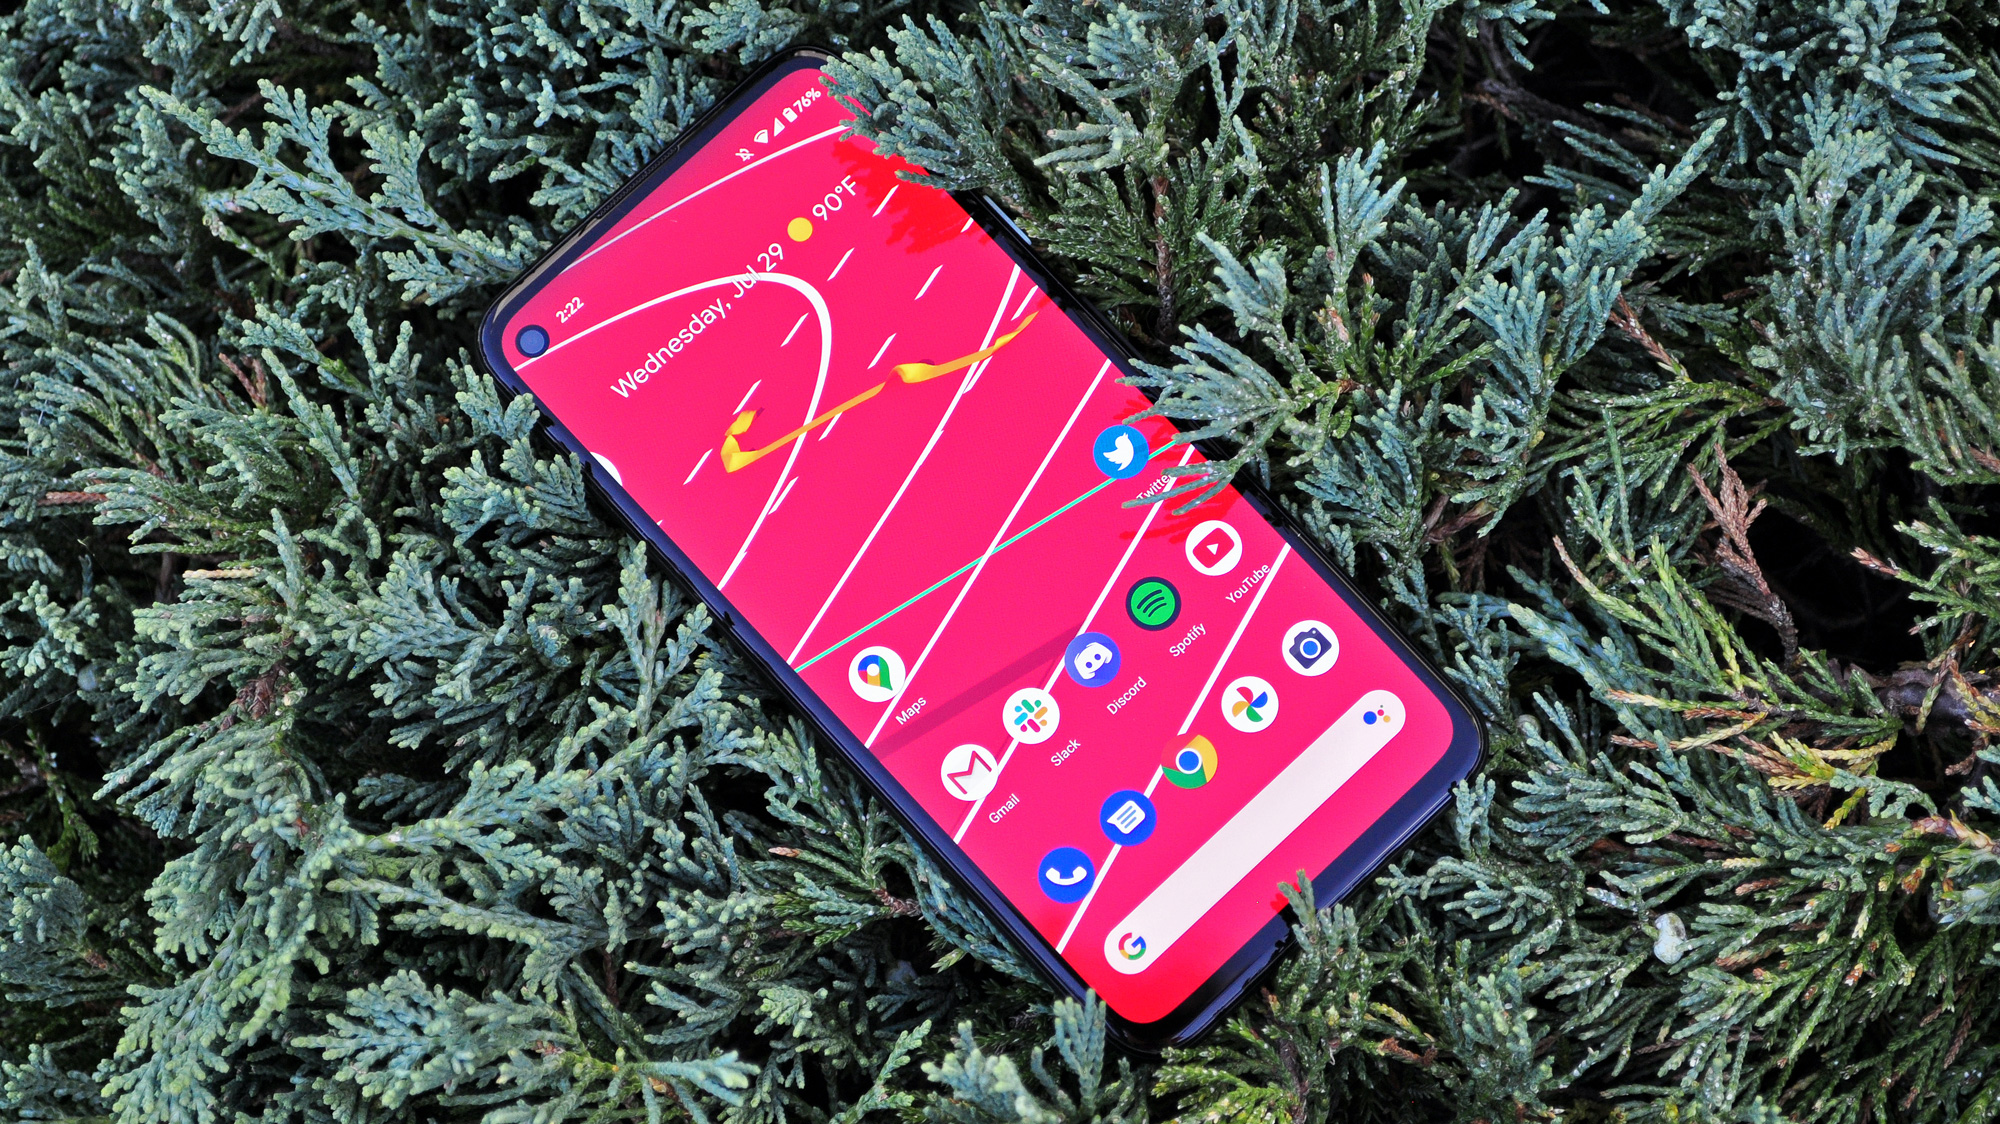 Google Pixel 4a is one of the best android phones in the UK